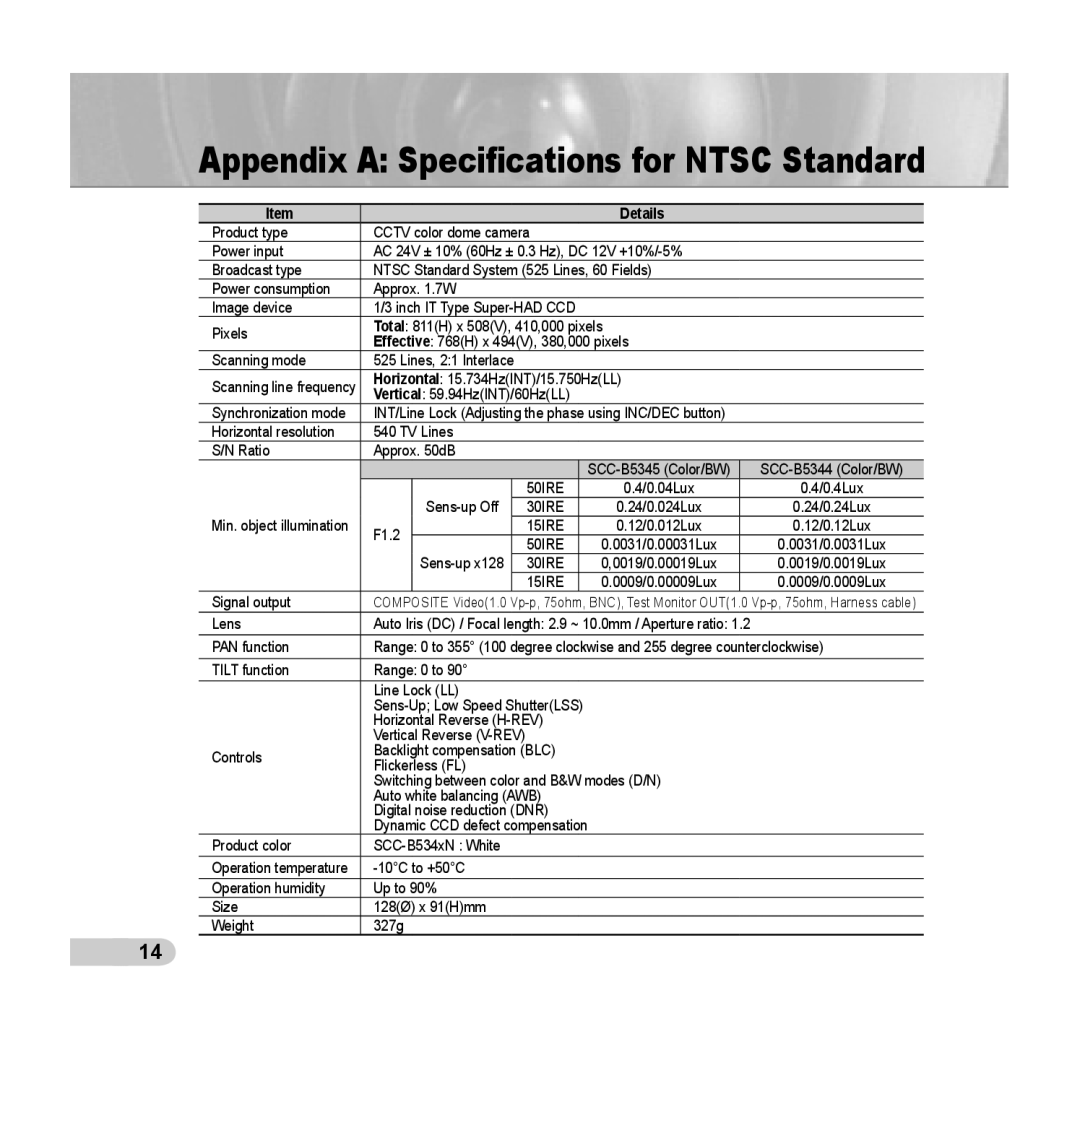 Samsung SCC-B5344, SCC-B5345 operating instructions Appendix A Specifications for NTSC Standard, Details 